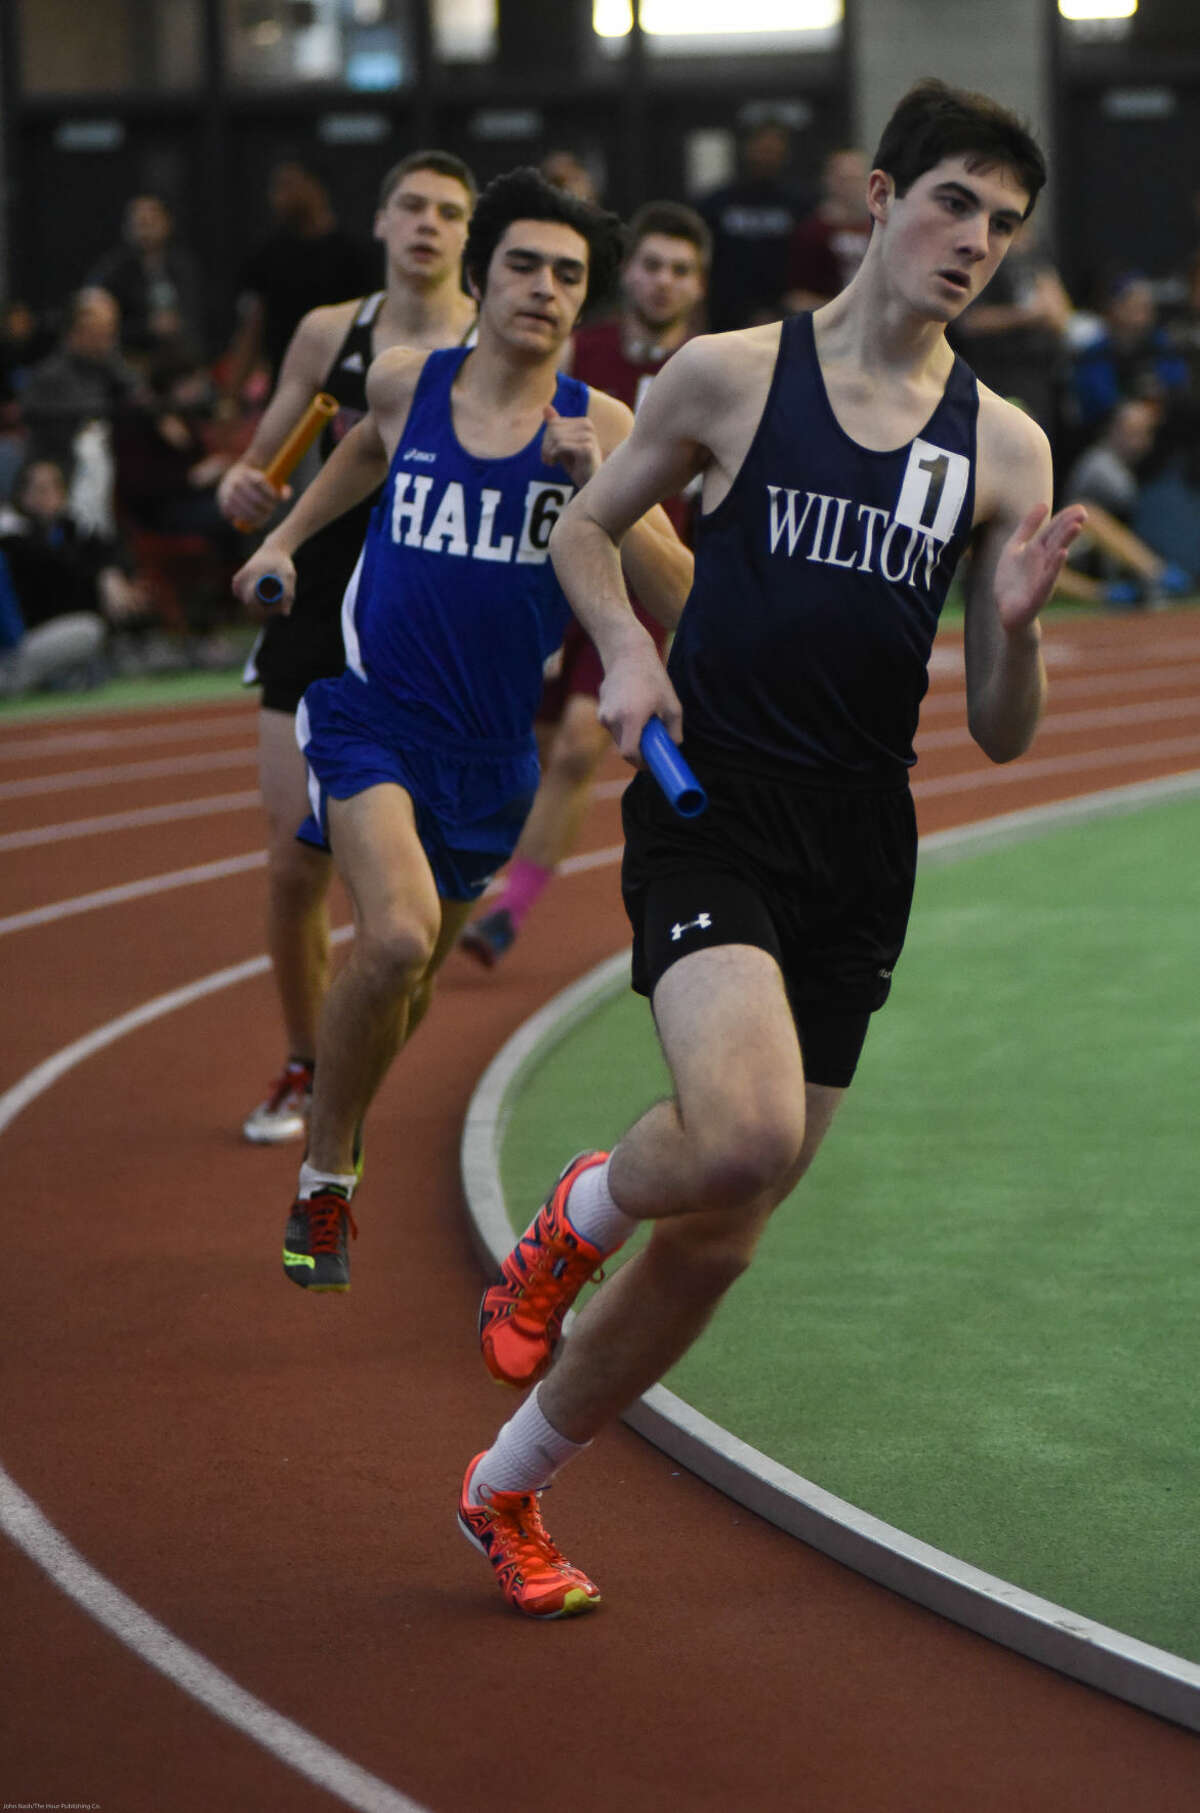 Hour photo/John Nash - Action from the Class L Track Championship meet.